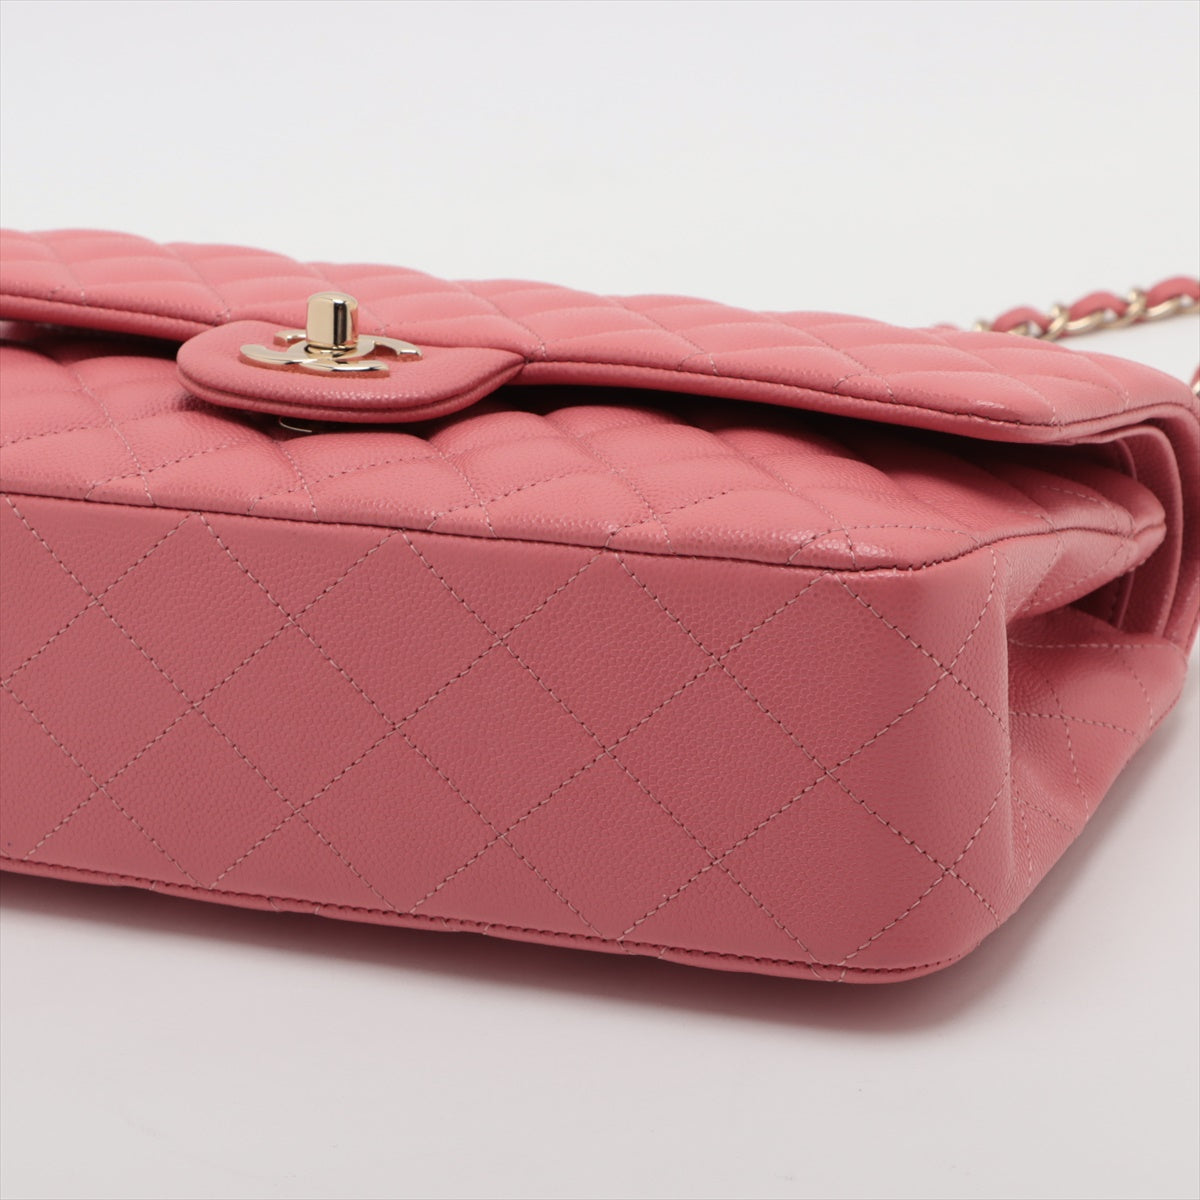 Chanel Matrasse 25 Caviar S Double Flap Double Chain Bag Pink G  28th A01112